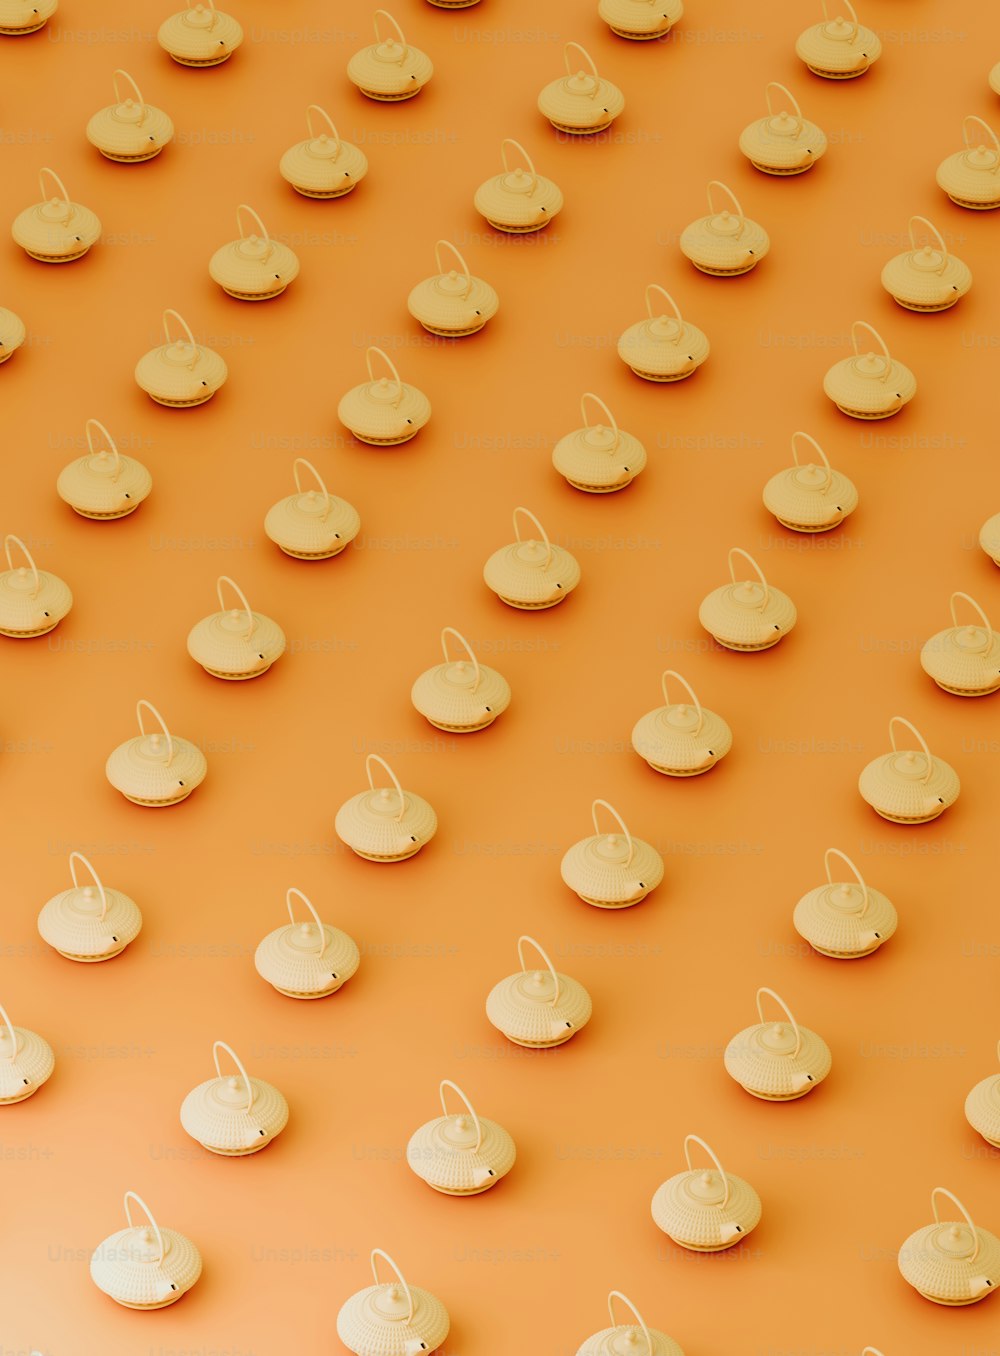 a group of small white umbrellas sitting on top of an orange surface